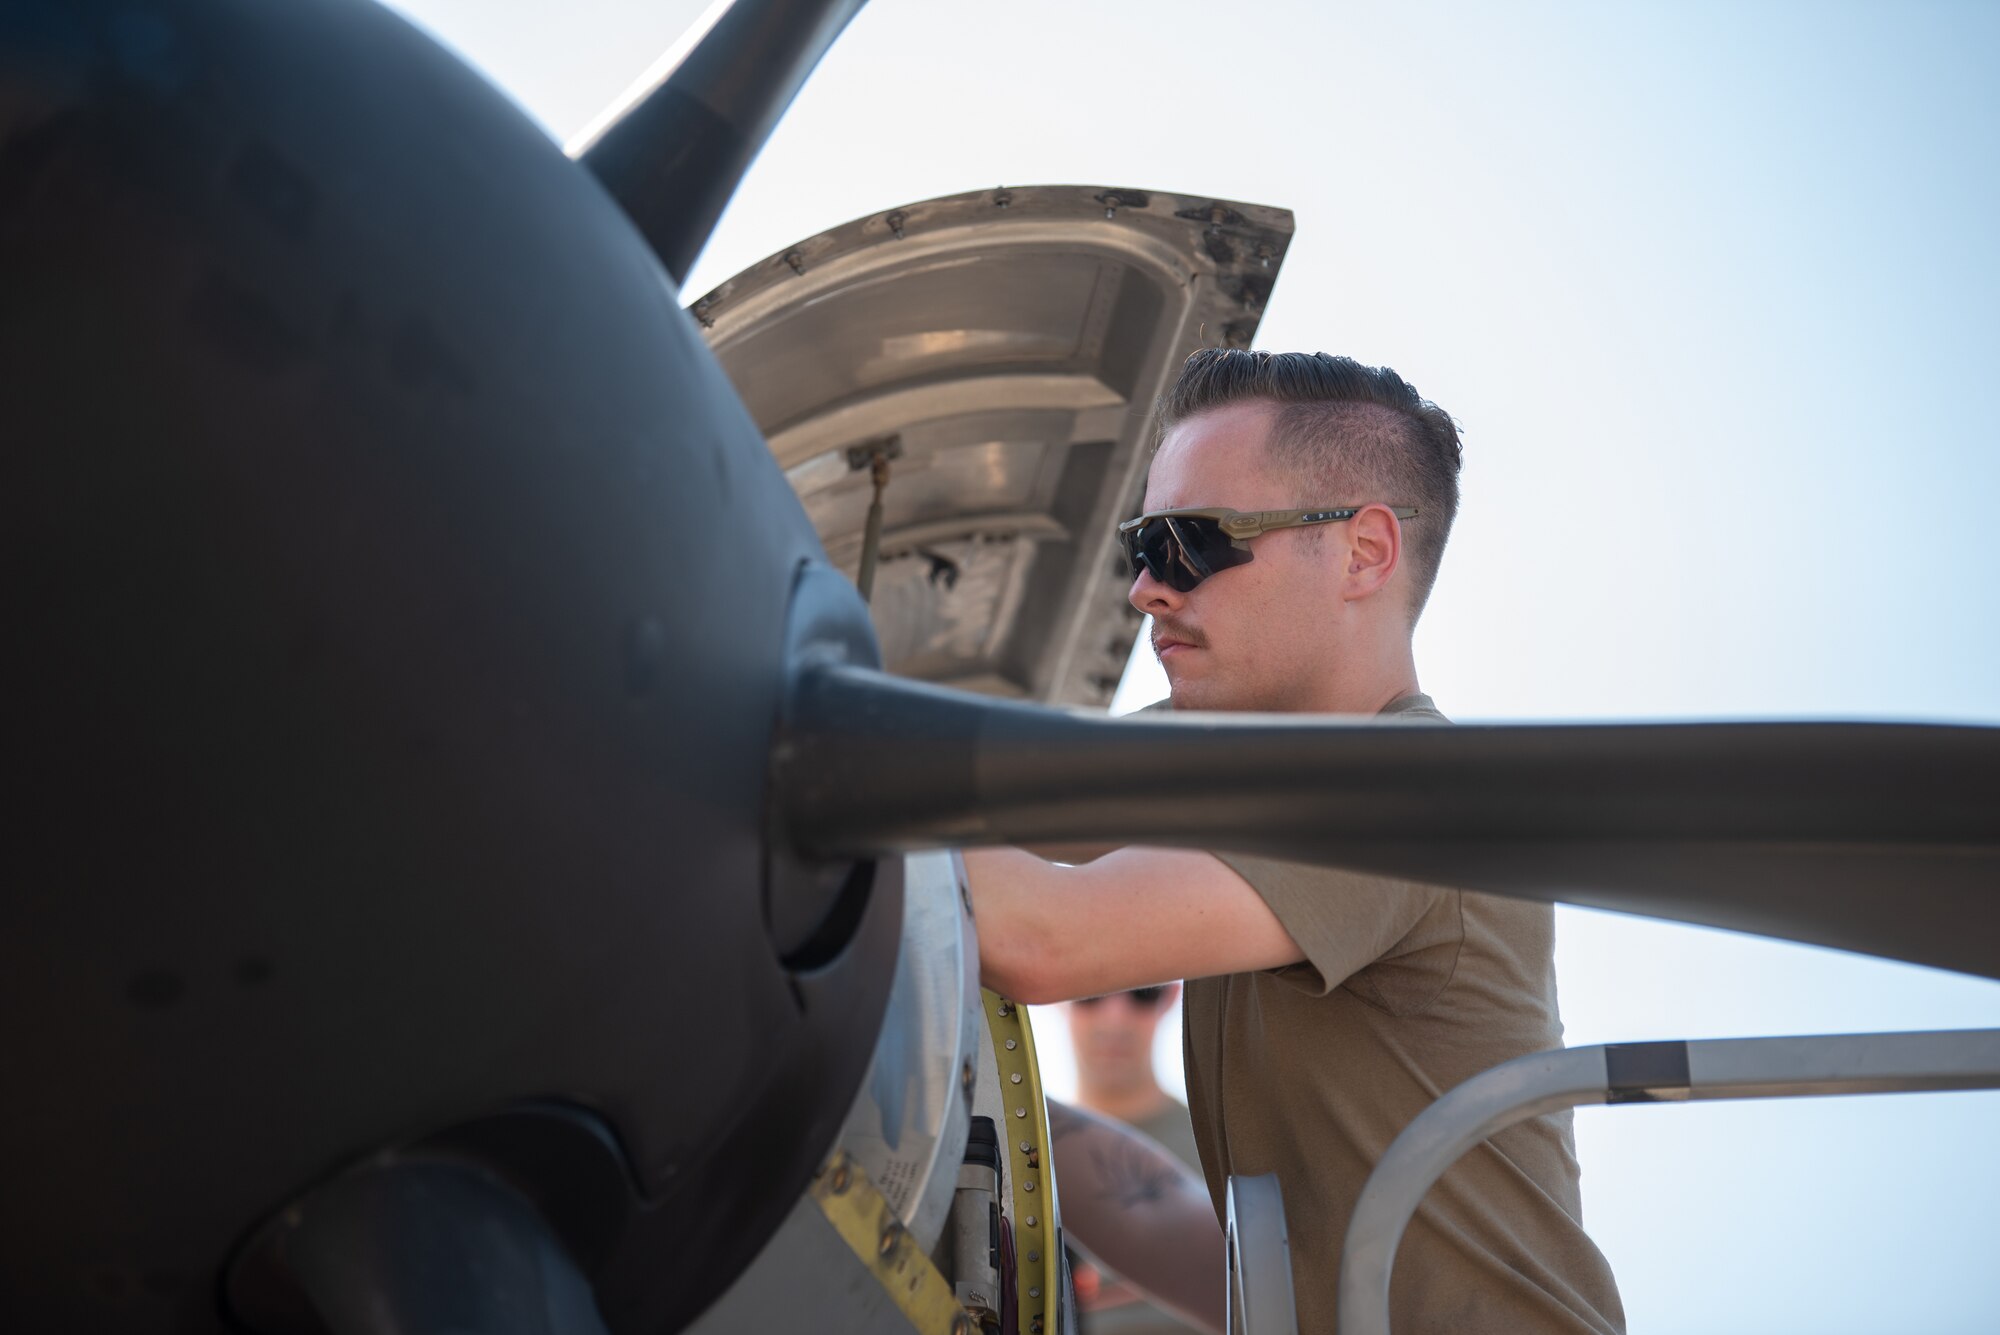 Senior Airman Kody Pippen, a engine shop technician with the Kentucky Air National Guard’s 123rd Maintenance Squadron, works on the engine of a C-130J Super Hercules at the Gulfport Combat Readiness Training Center in Gulfport, Miss., Aug. 15, 2022, as part of Maintenance University. More than 300 Air Guardsmen from Kentucky, Texas, West Virginia, Rhode Island and California trained on career-specific proficiencies during the intensive week-long course. (U.S Air National Guard photo by Phil Speck)